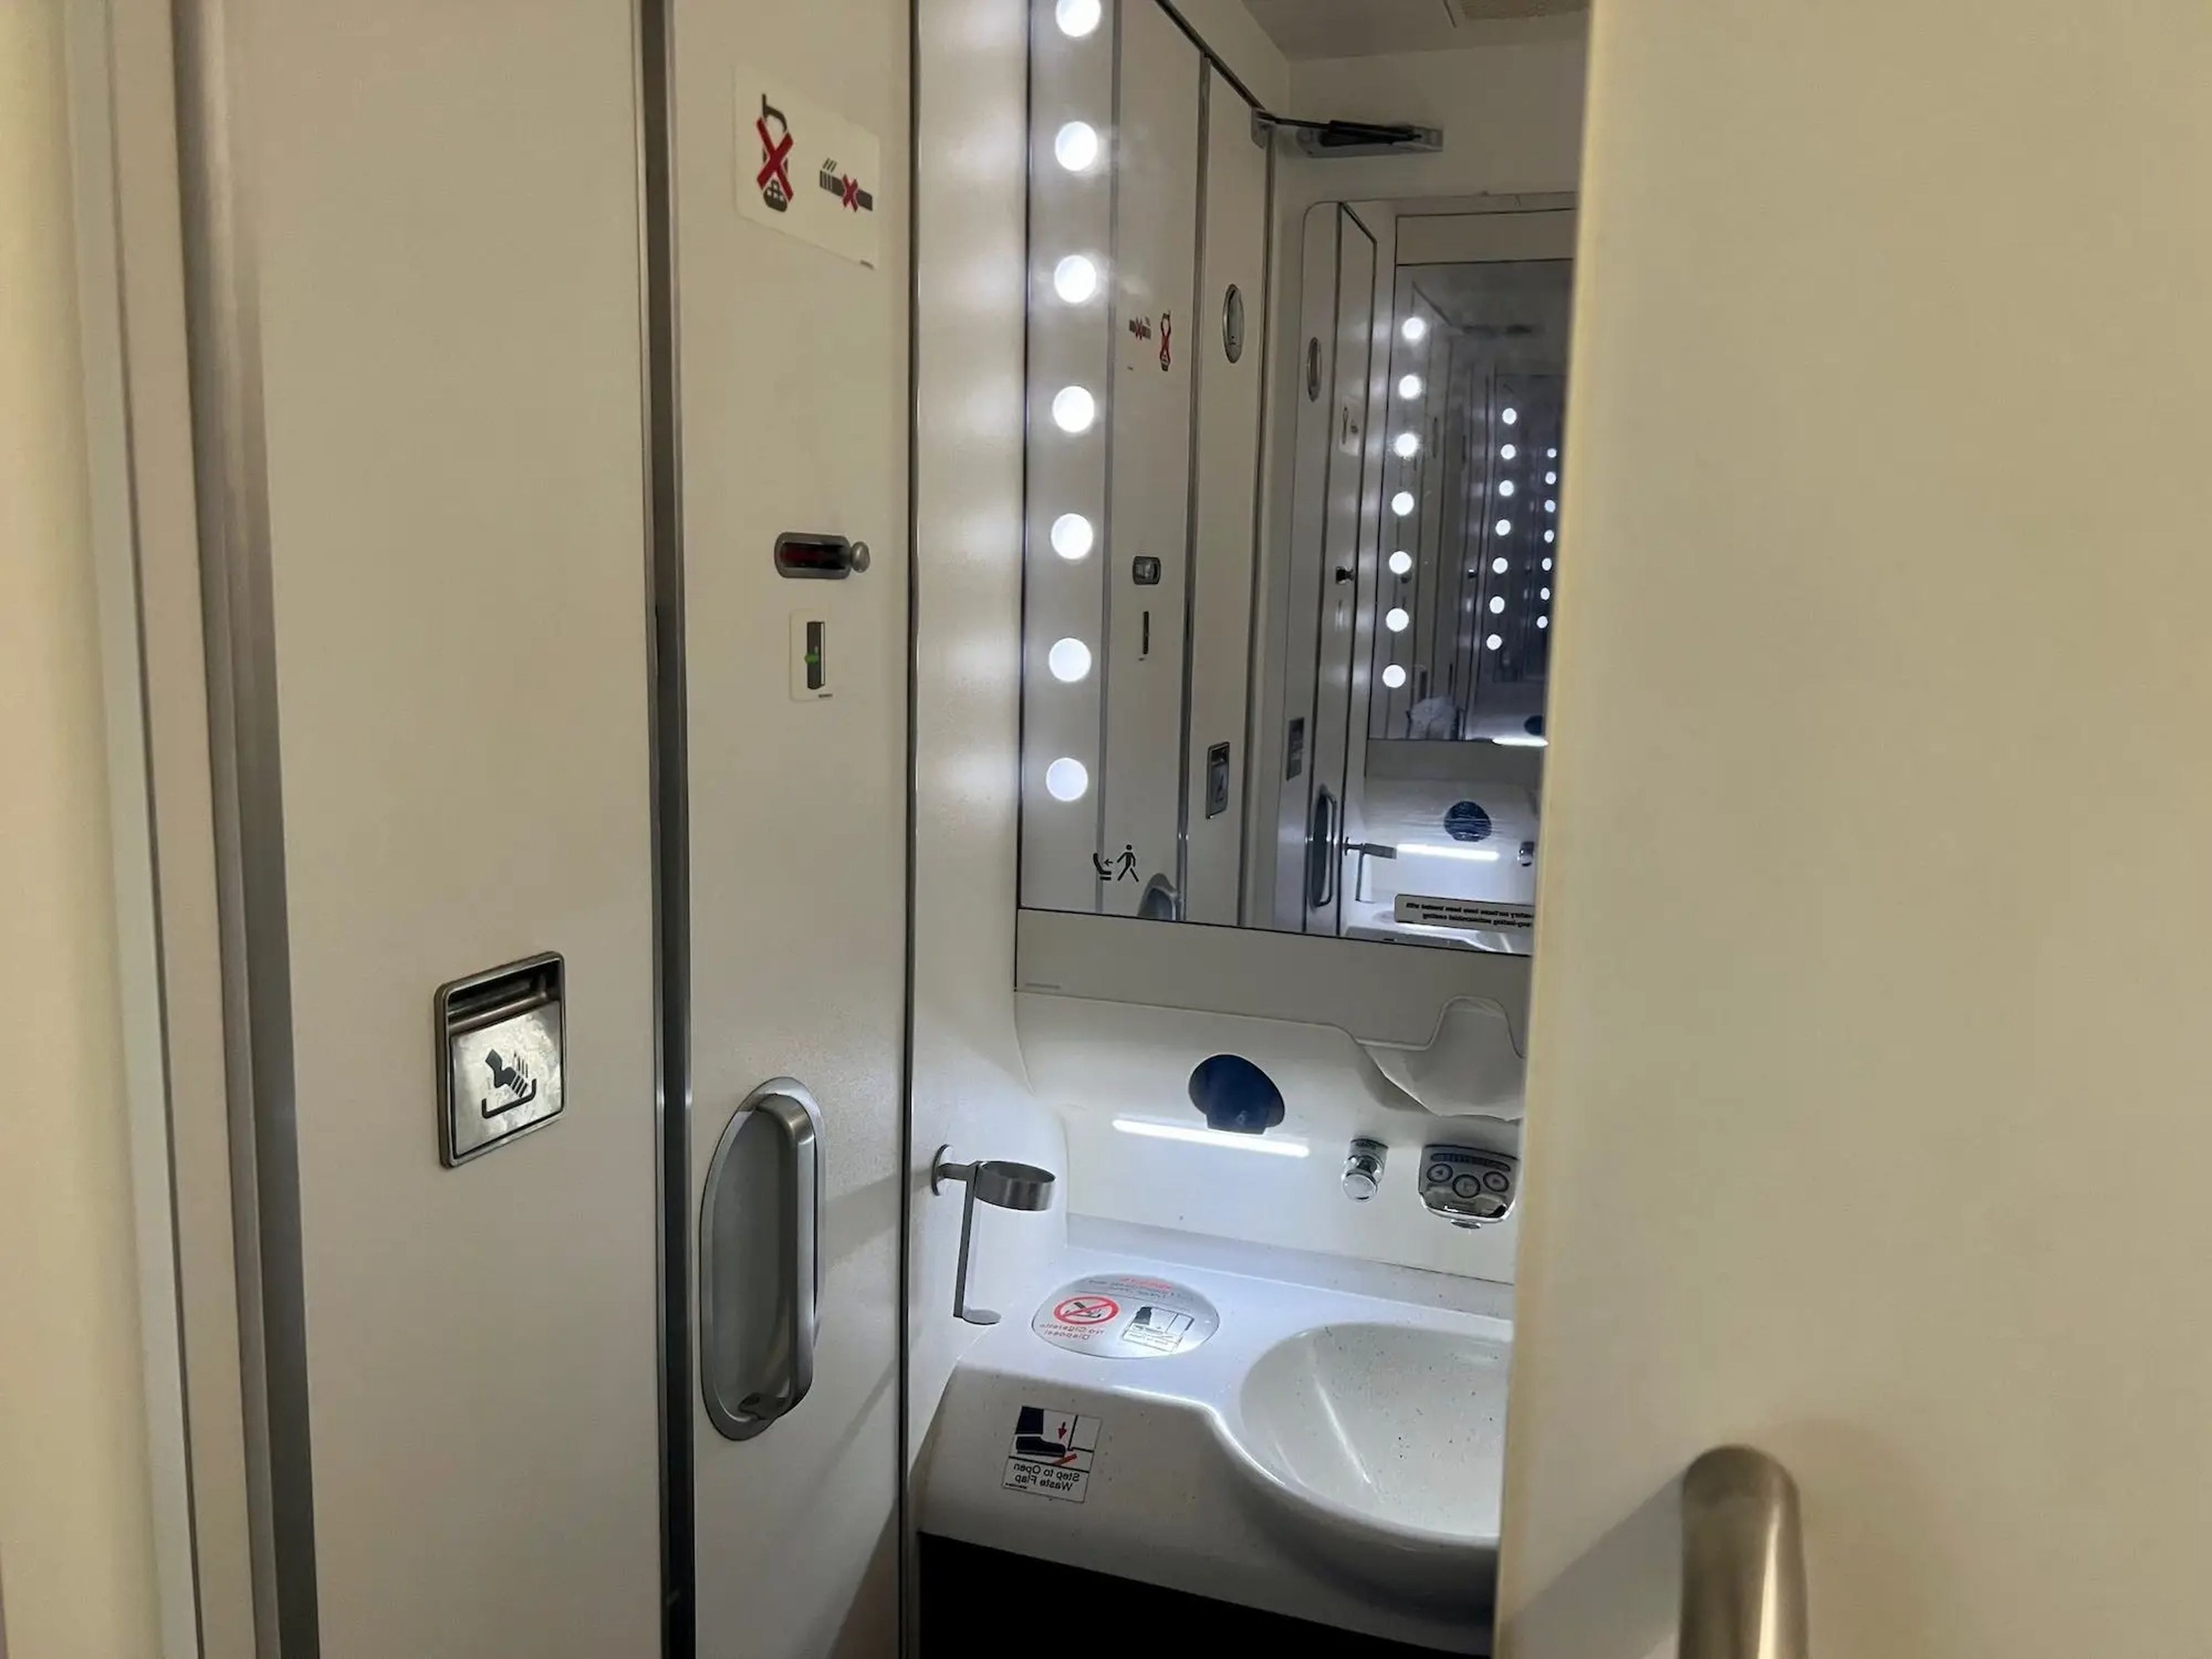 The full-body mirror in Singapore's A380 lavatory.